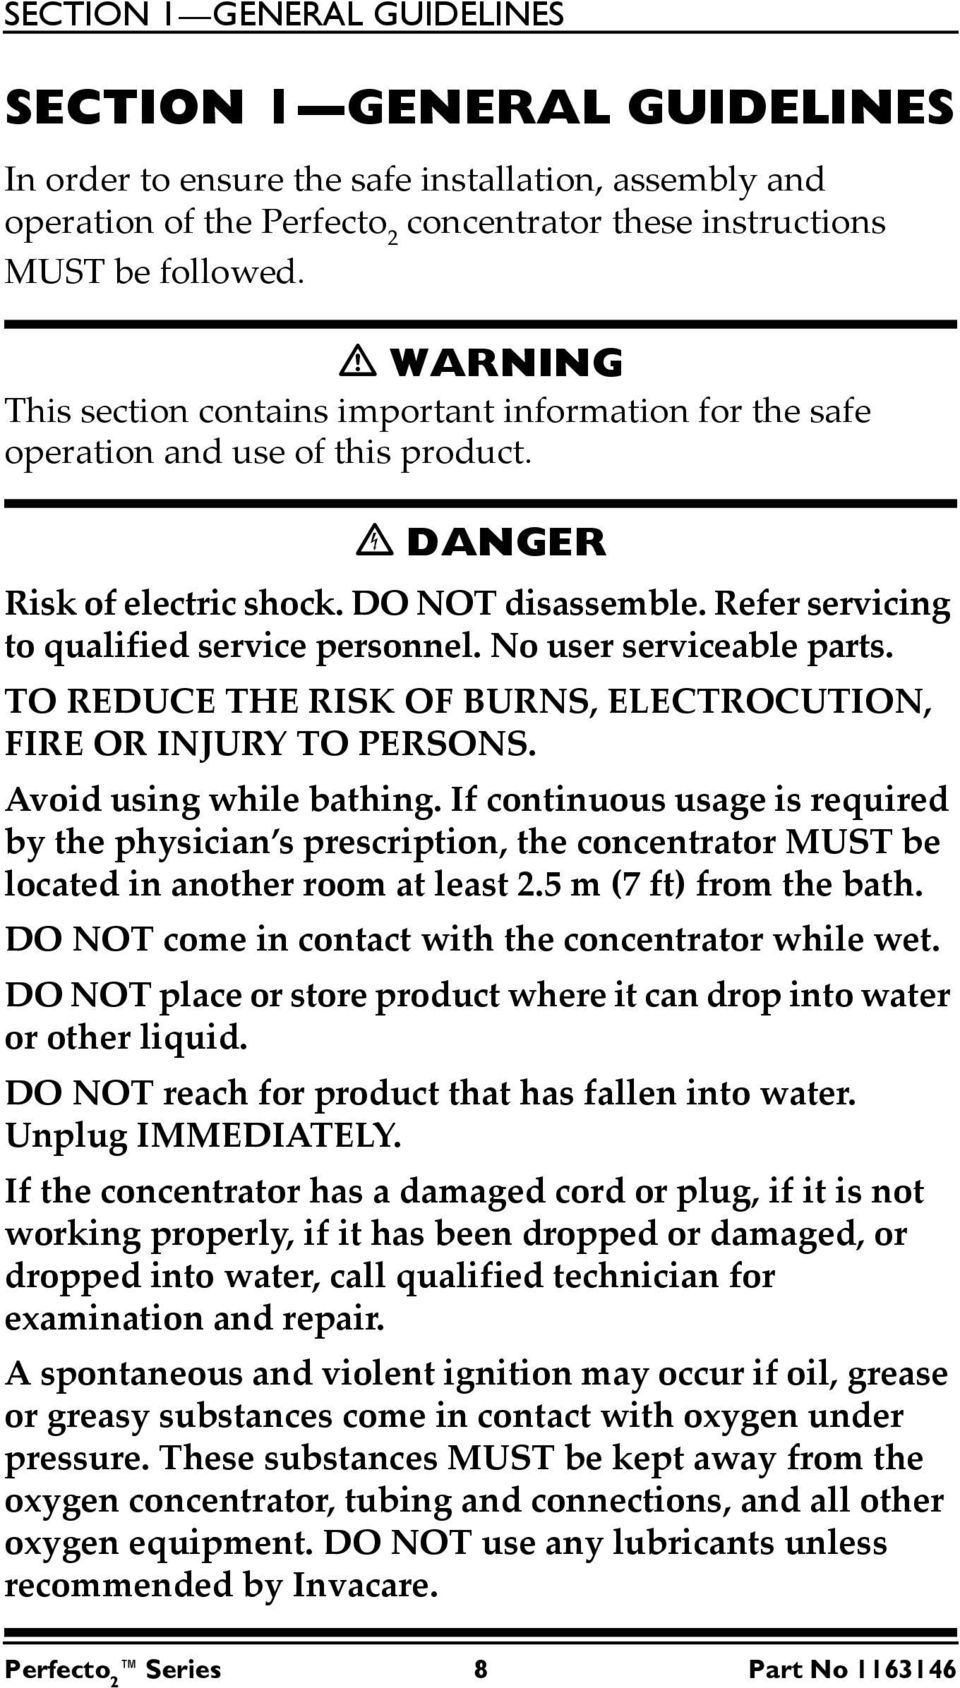 No user serviceable parts. TO REDUCE THE RISK OF BURNS, ELECTROCUTION, FIRE OR INJURY TO PERSONS. Avoid using while bathing.